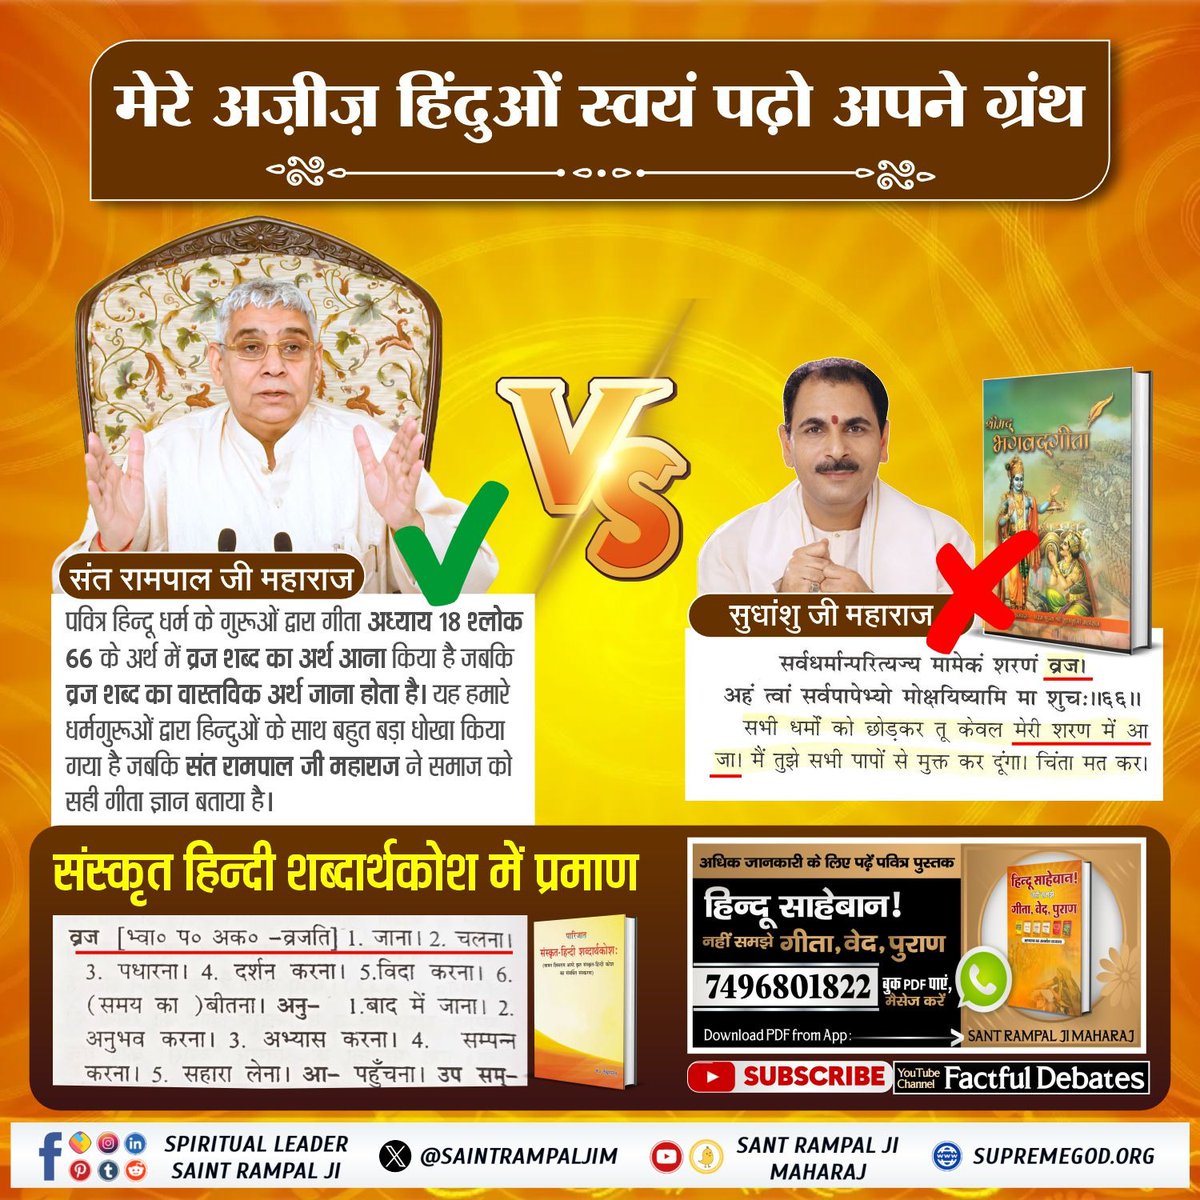 #Mere_Aziz_Hinduon_Swayam #मेरे_अज़ीज़_हिंदुओं_स्वयं_पढ़ो अपने ग्रंथ Open the Scriptures of your Religion and see apart from Sant Rampal Ji Maharaj there is no other Saint who gives Knowledge on the basis of Religious Scriptures. Right way of vedic worship.